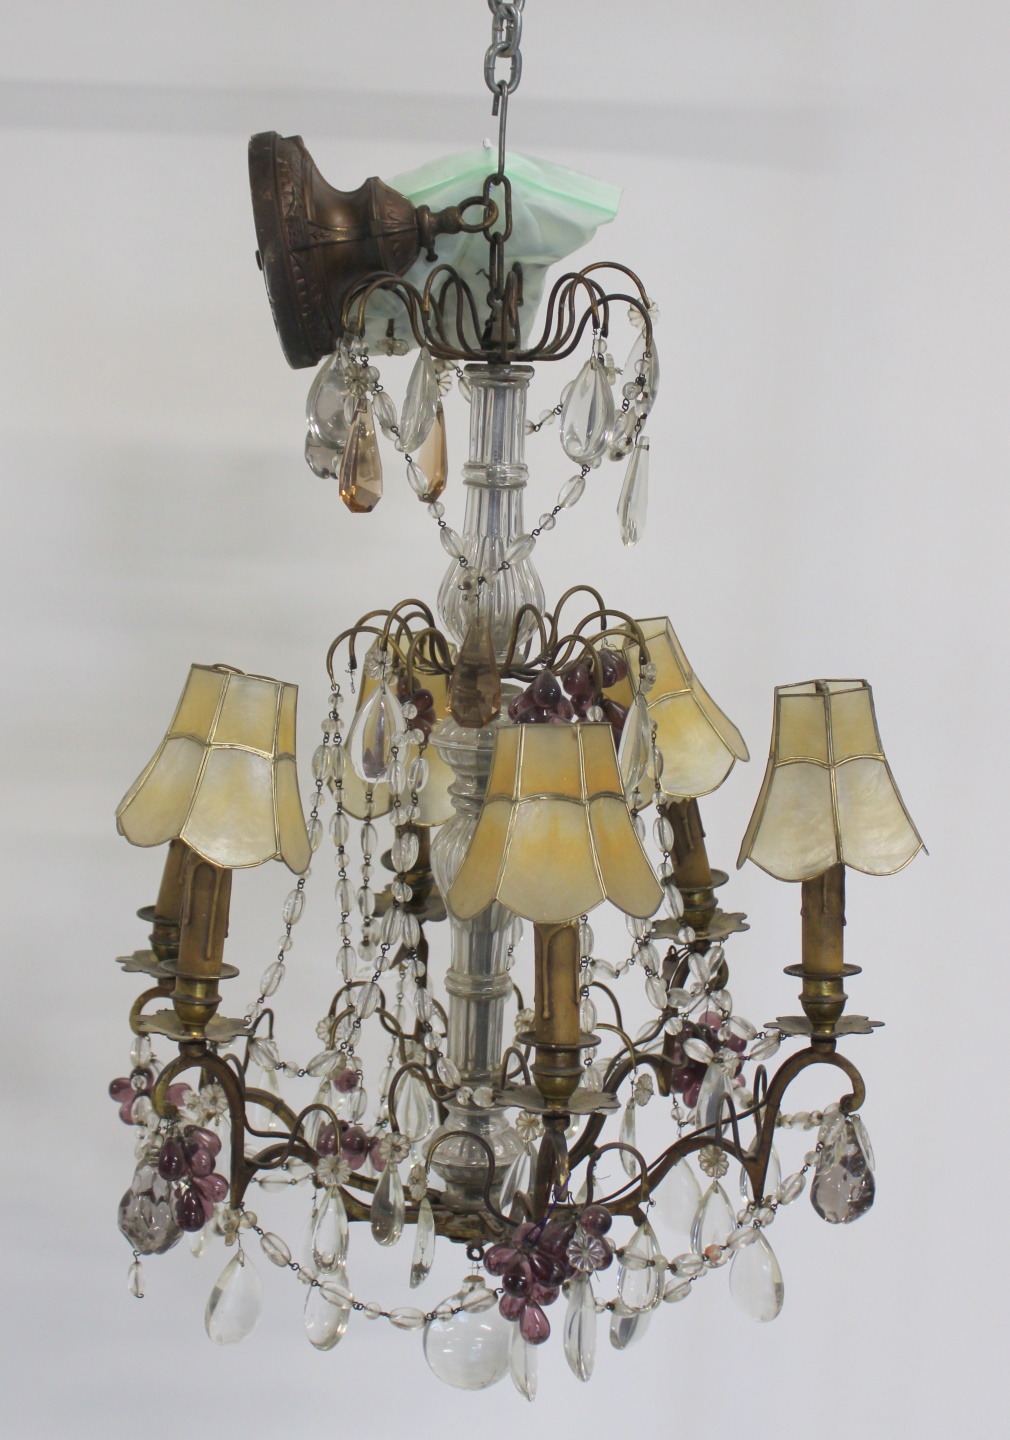 ANTIQUE CHANDELIER TOGETHER WITH